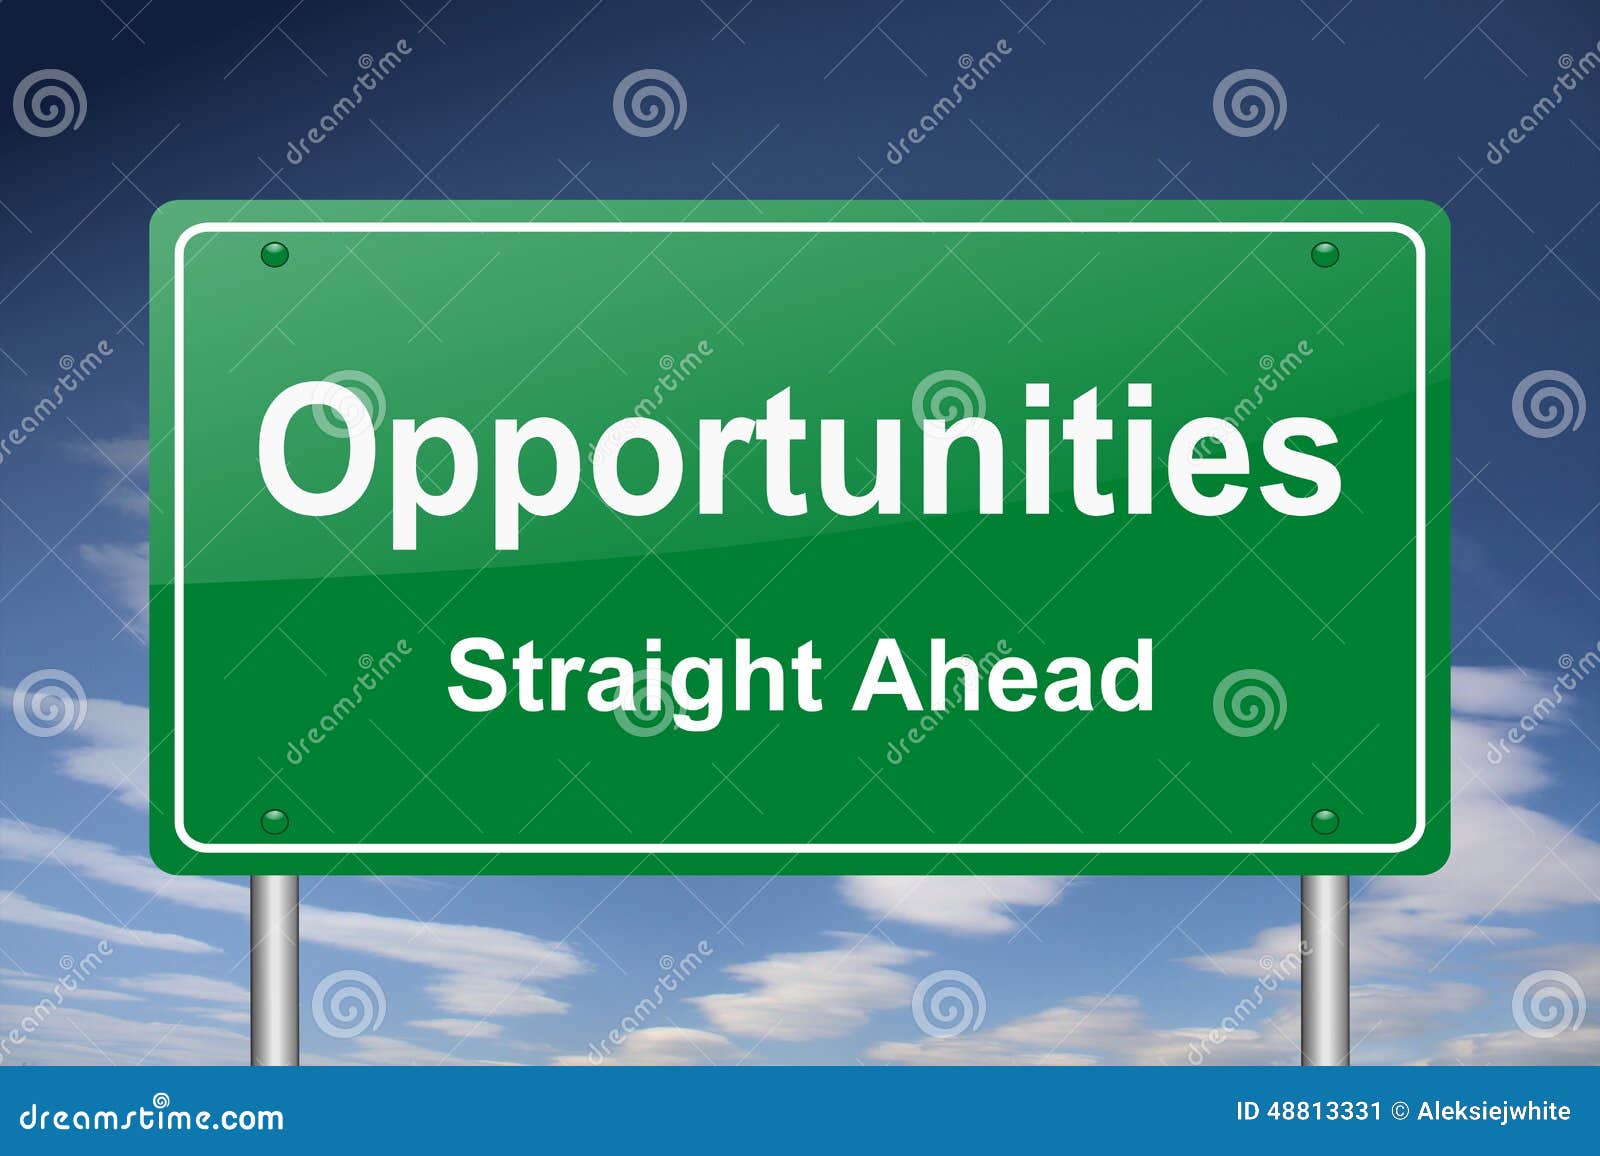 opportunities sign